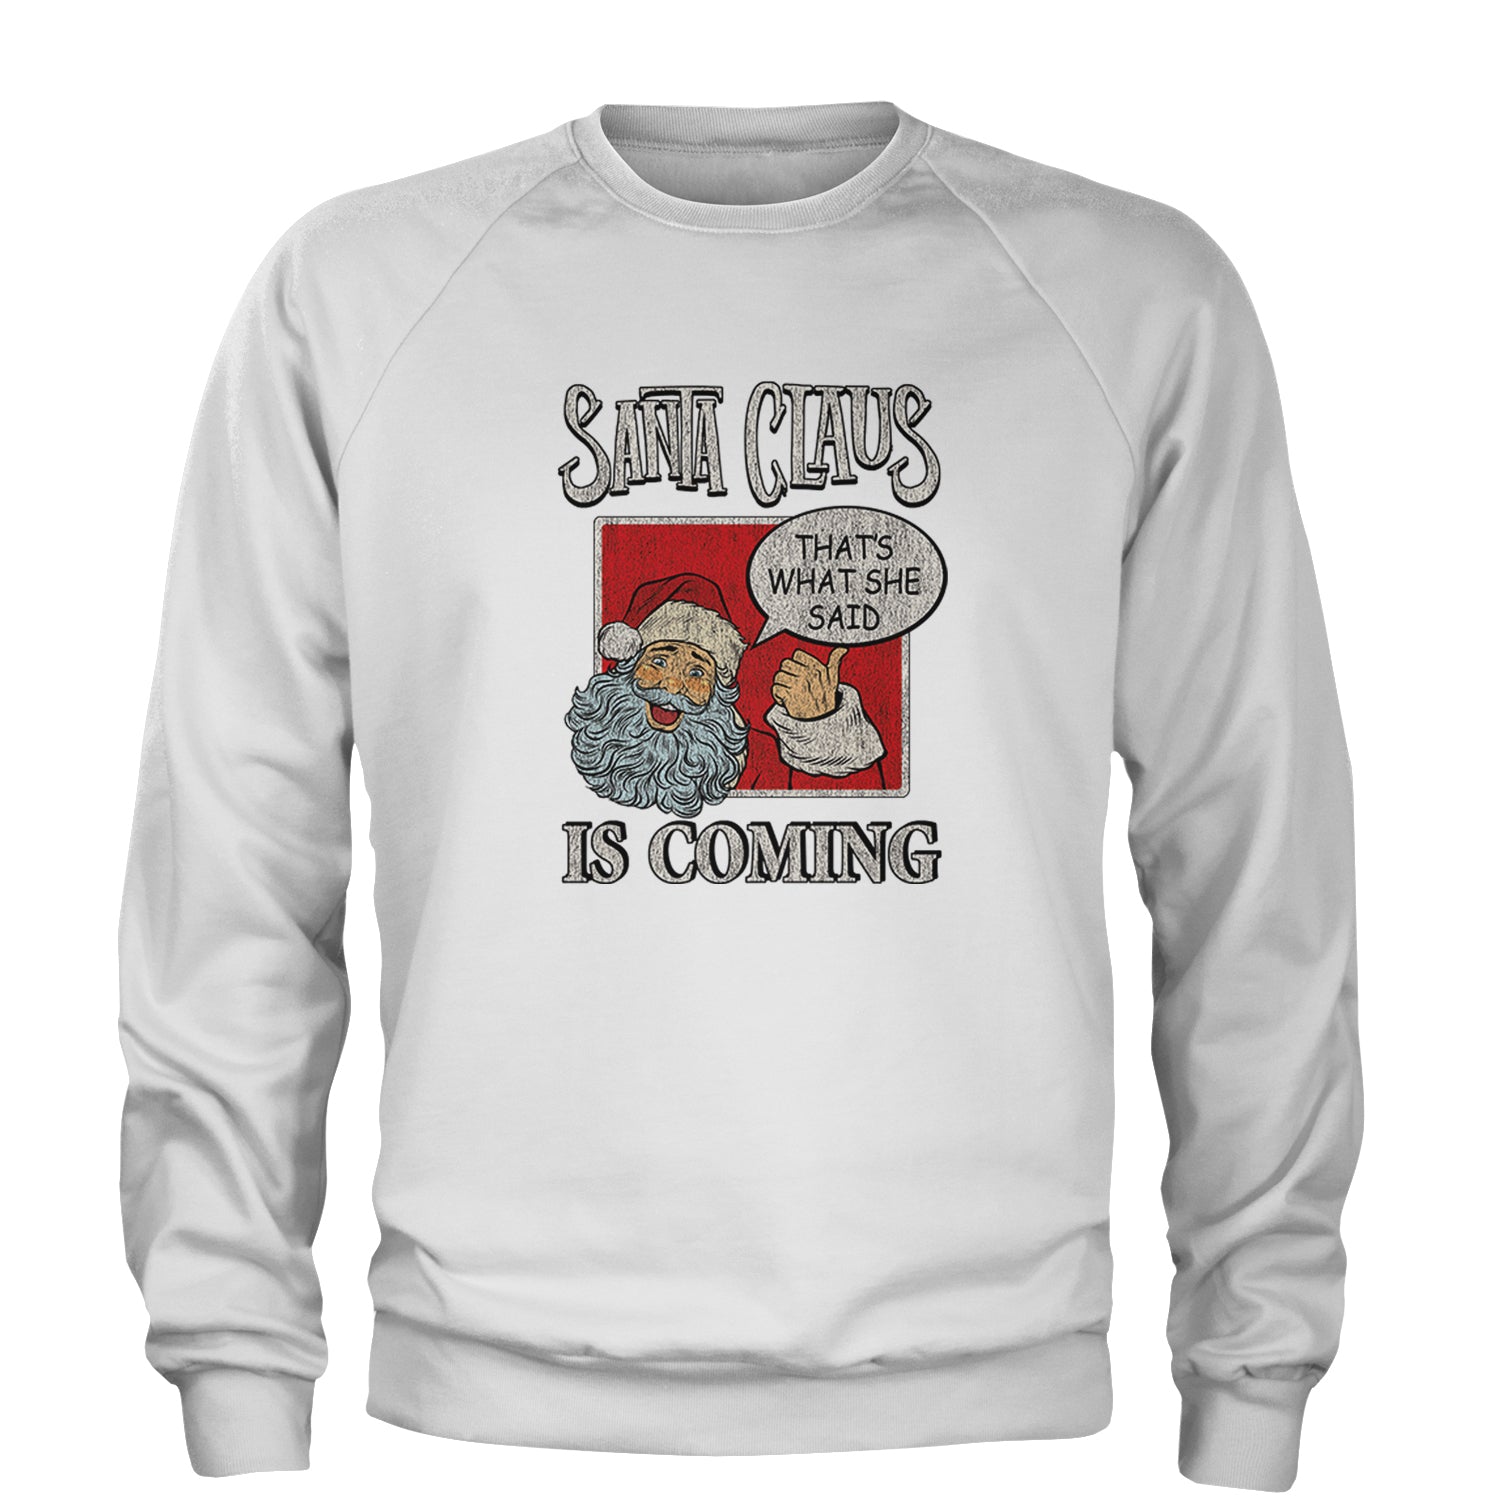 Santa Claus Is Coming - That's What She Said Adult Crewneck Sweatshirt christmas, dunder, holiday, michael, mifflin, office, sweater, ugly, xmas by Expression Tees